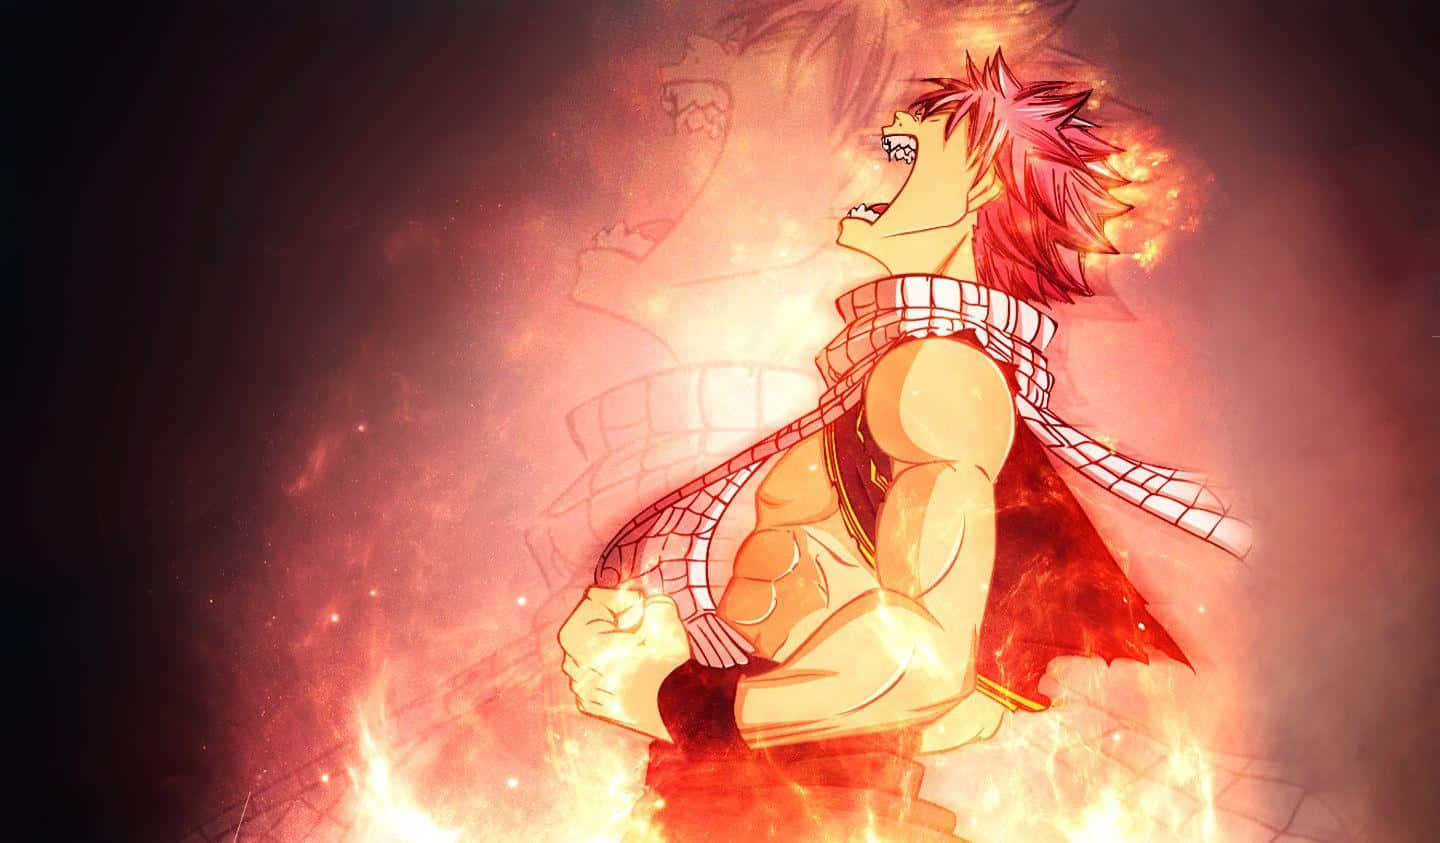 Natsu Dragneel Of Fairy Tail In Action